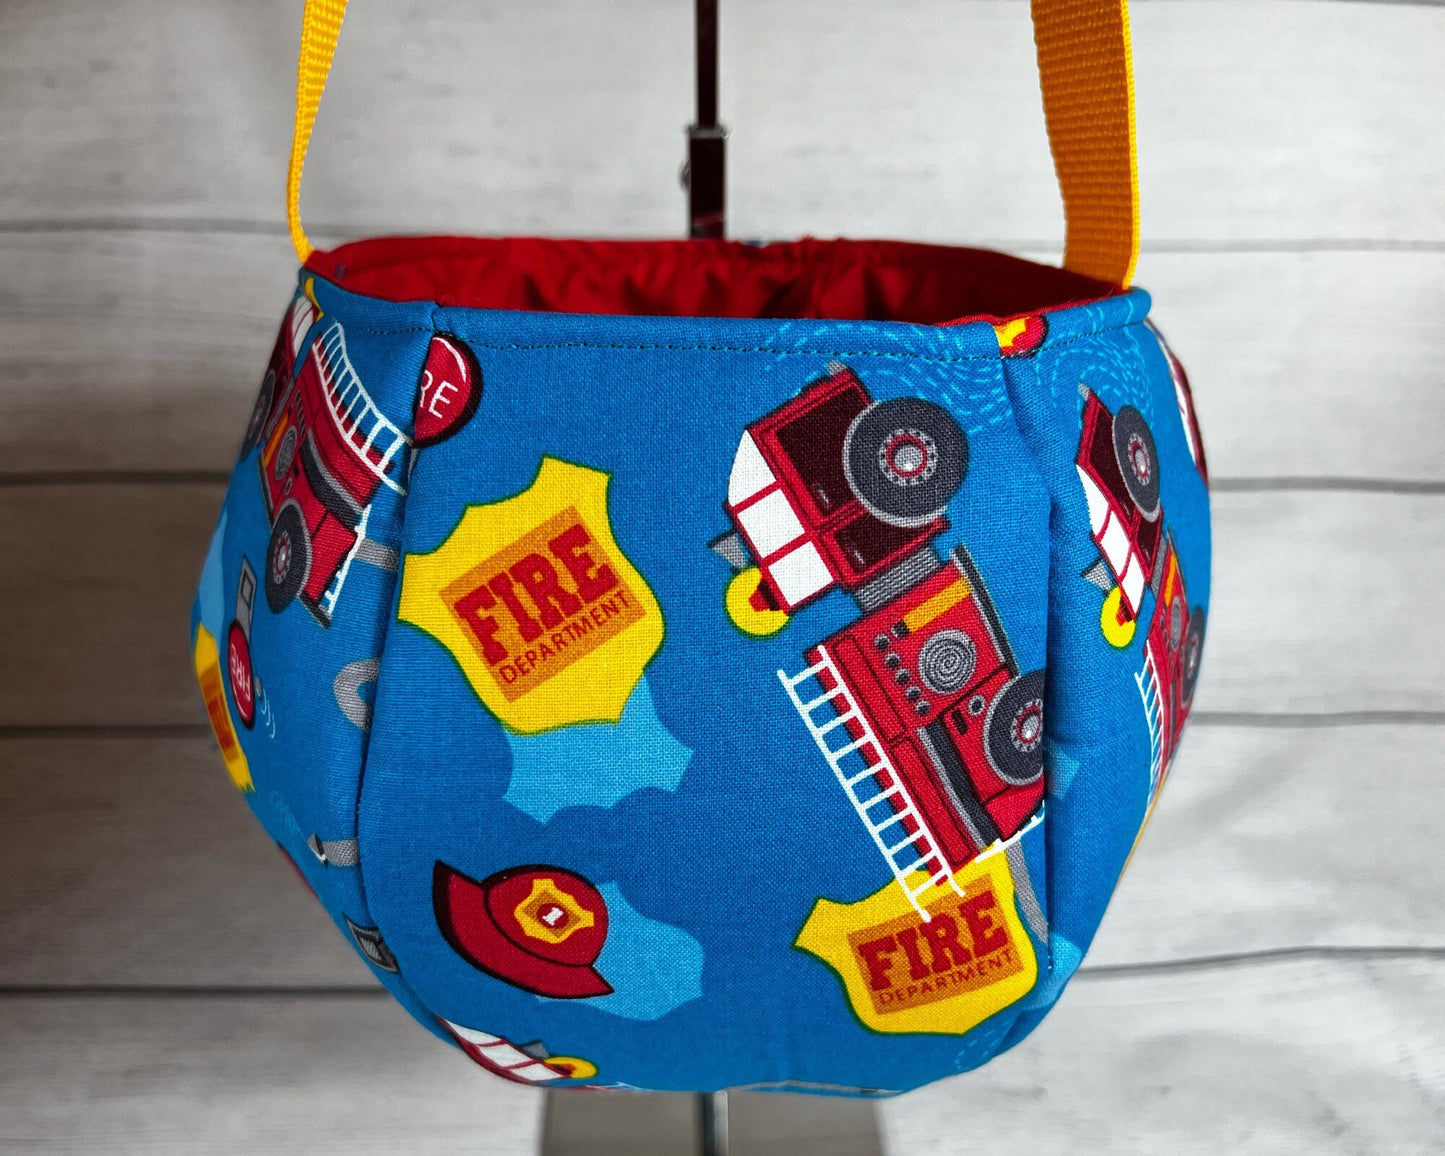 Fire Truck Bag - Tote - Red - Fire Department - Fire Hat - Ladder - Water - Gift - Everyday - Holiday - Easter - Halloween - Party